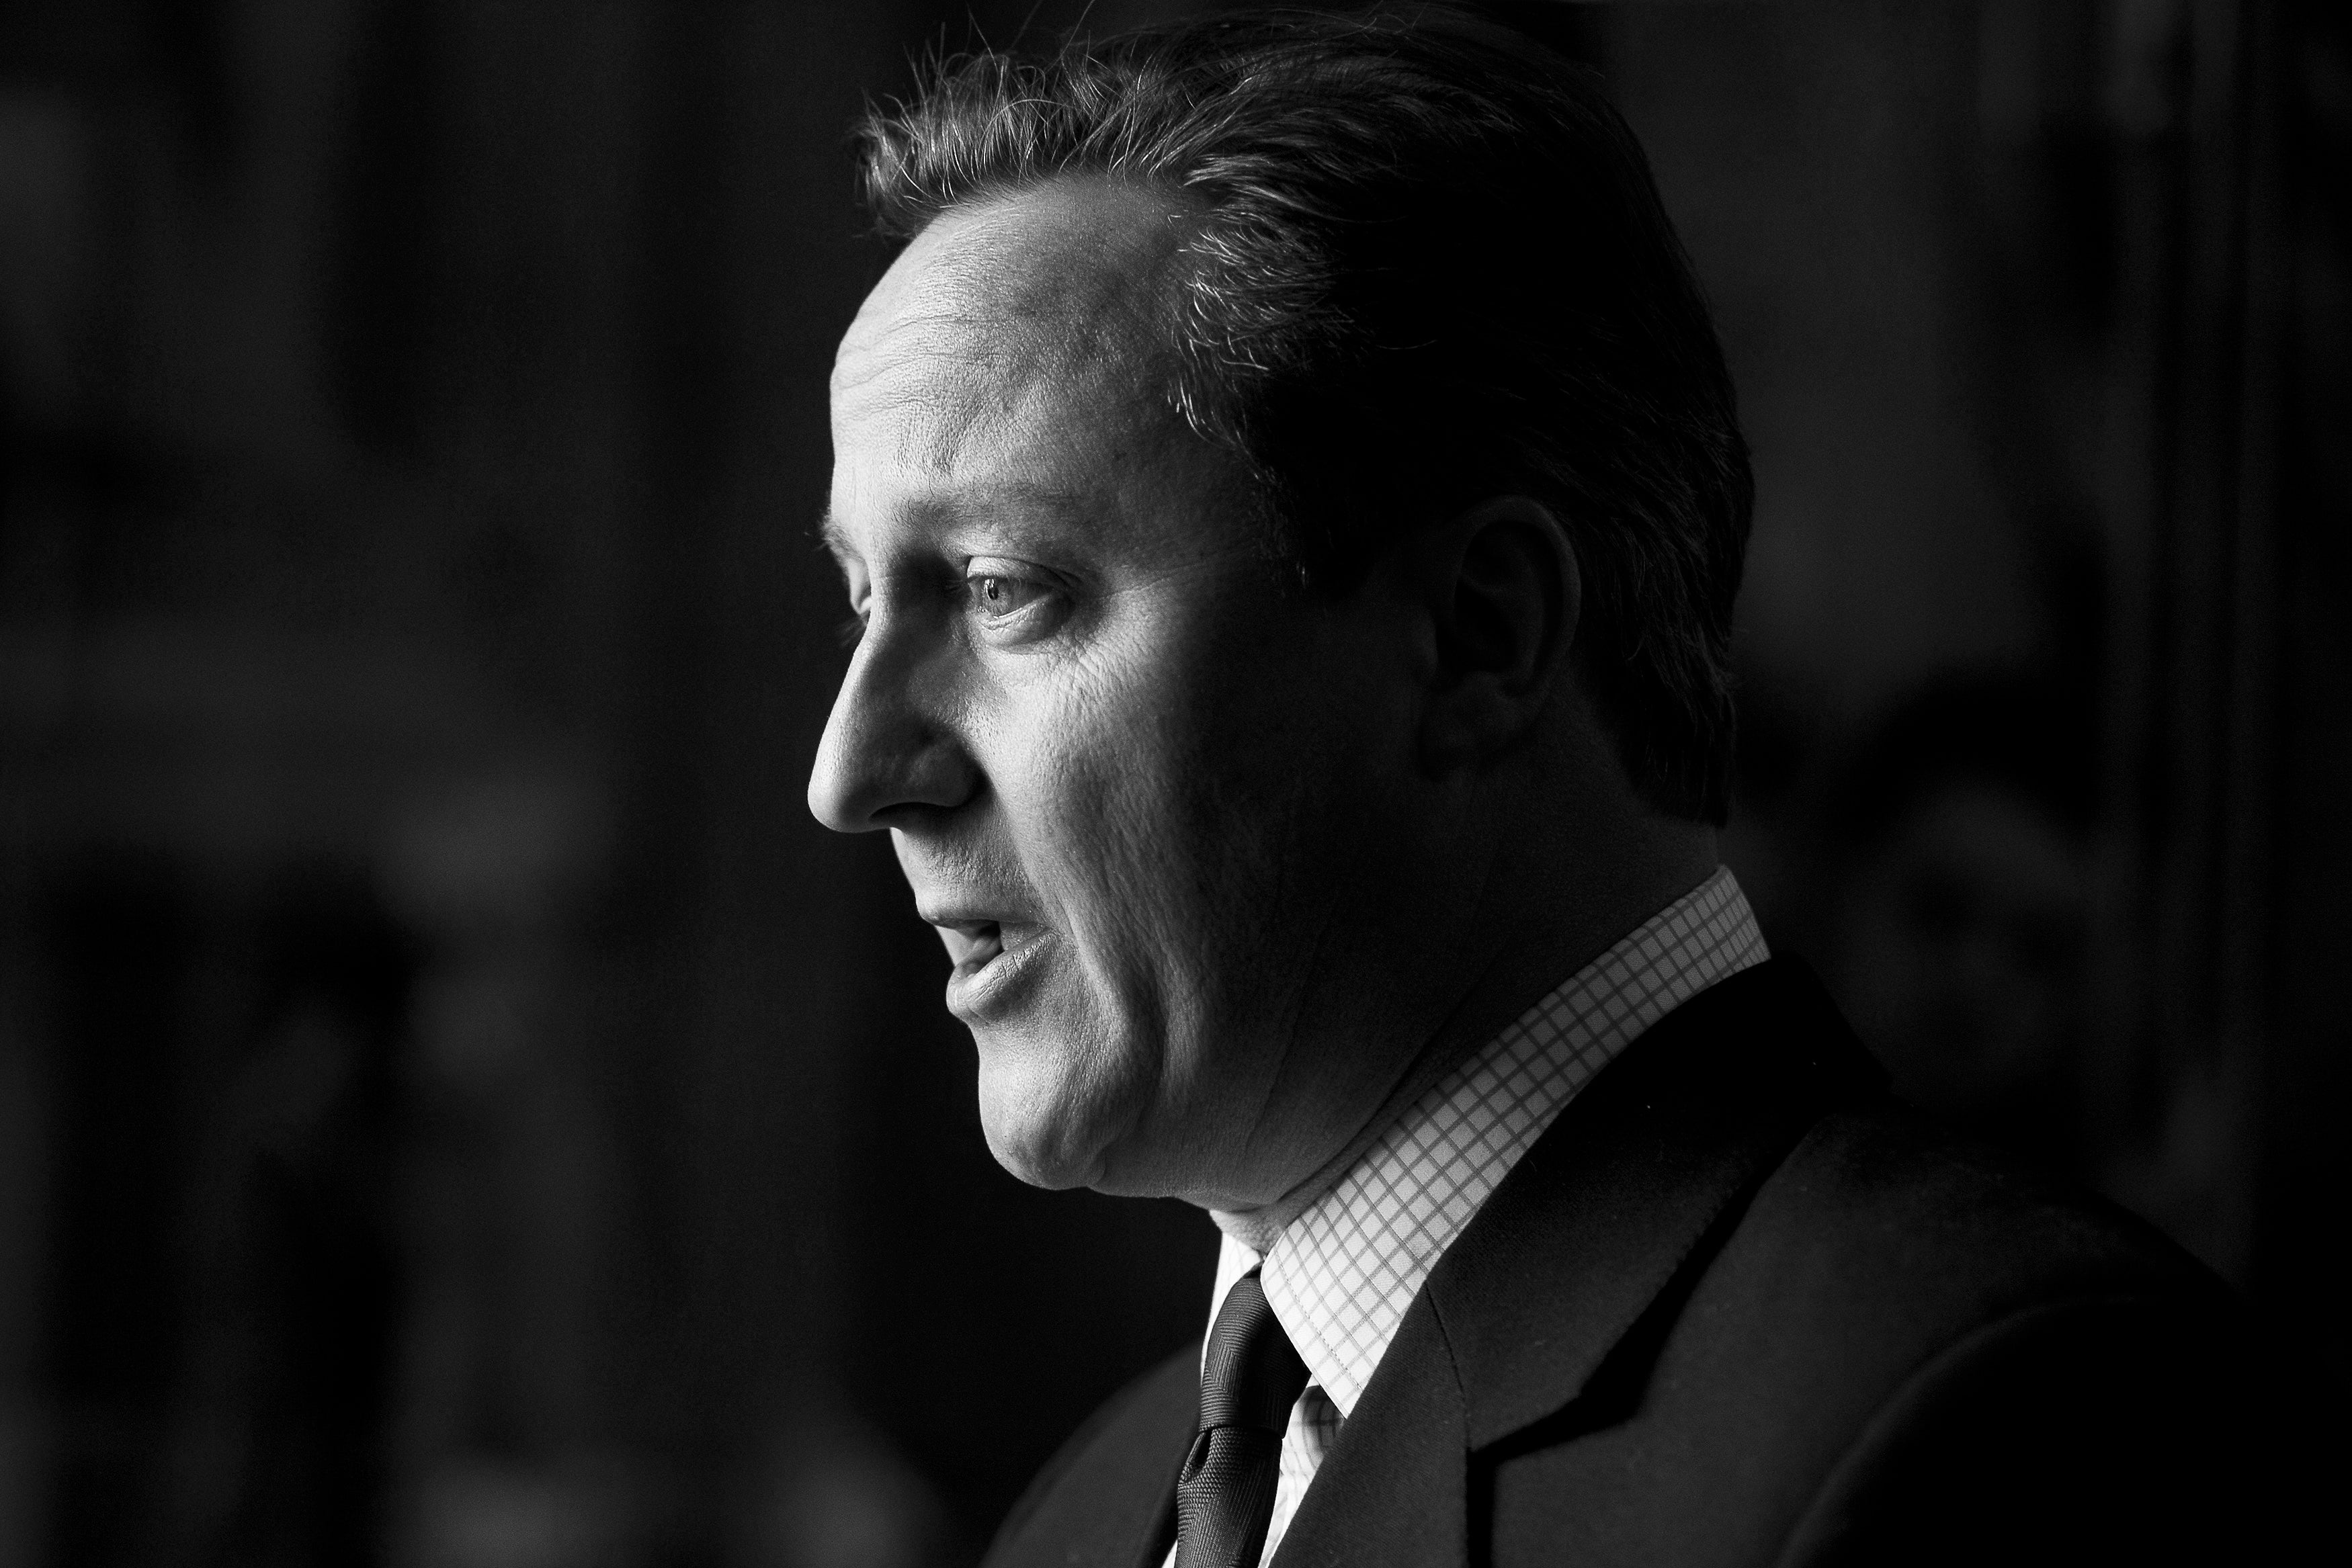 David Cameron founded the National Citizen Service in 2011, when he was prime minister